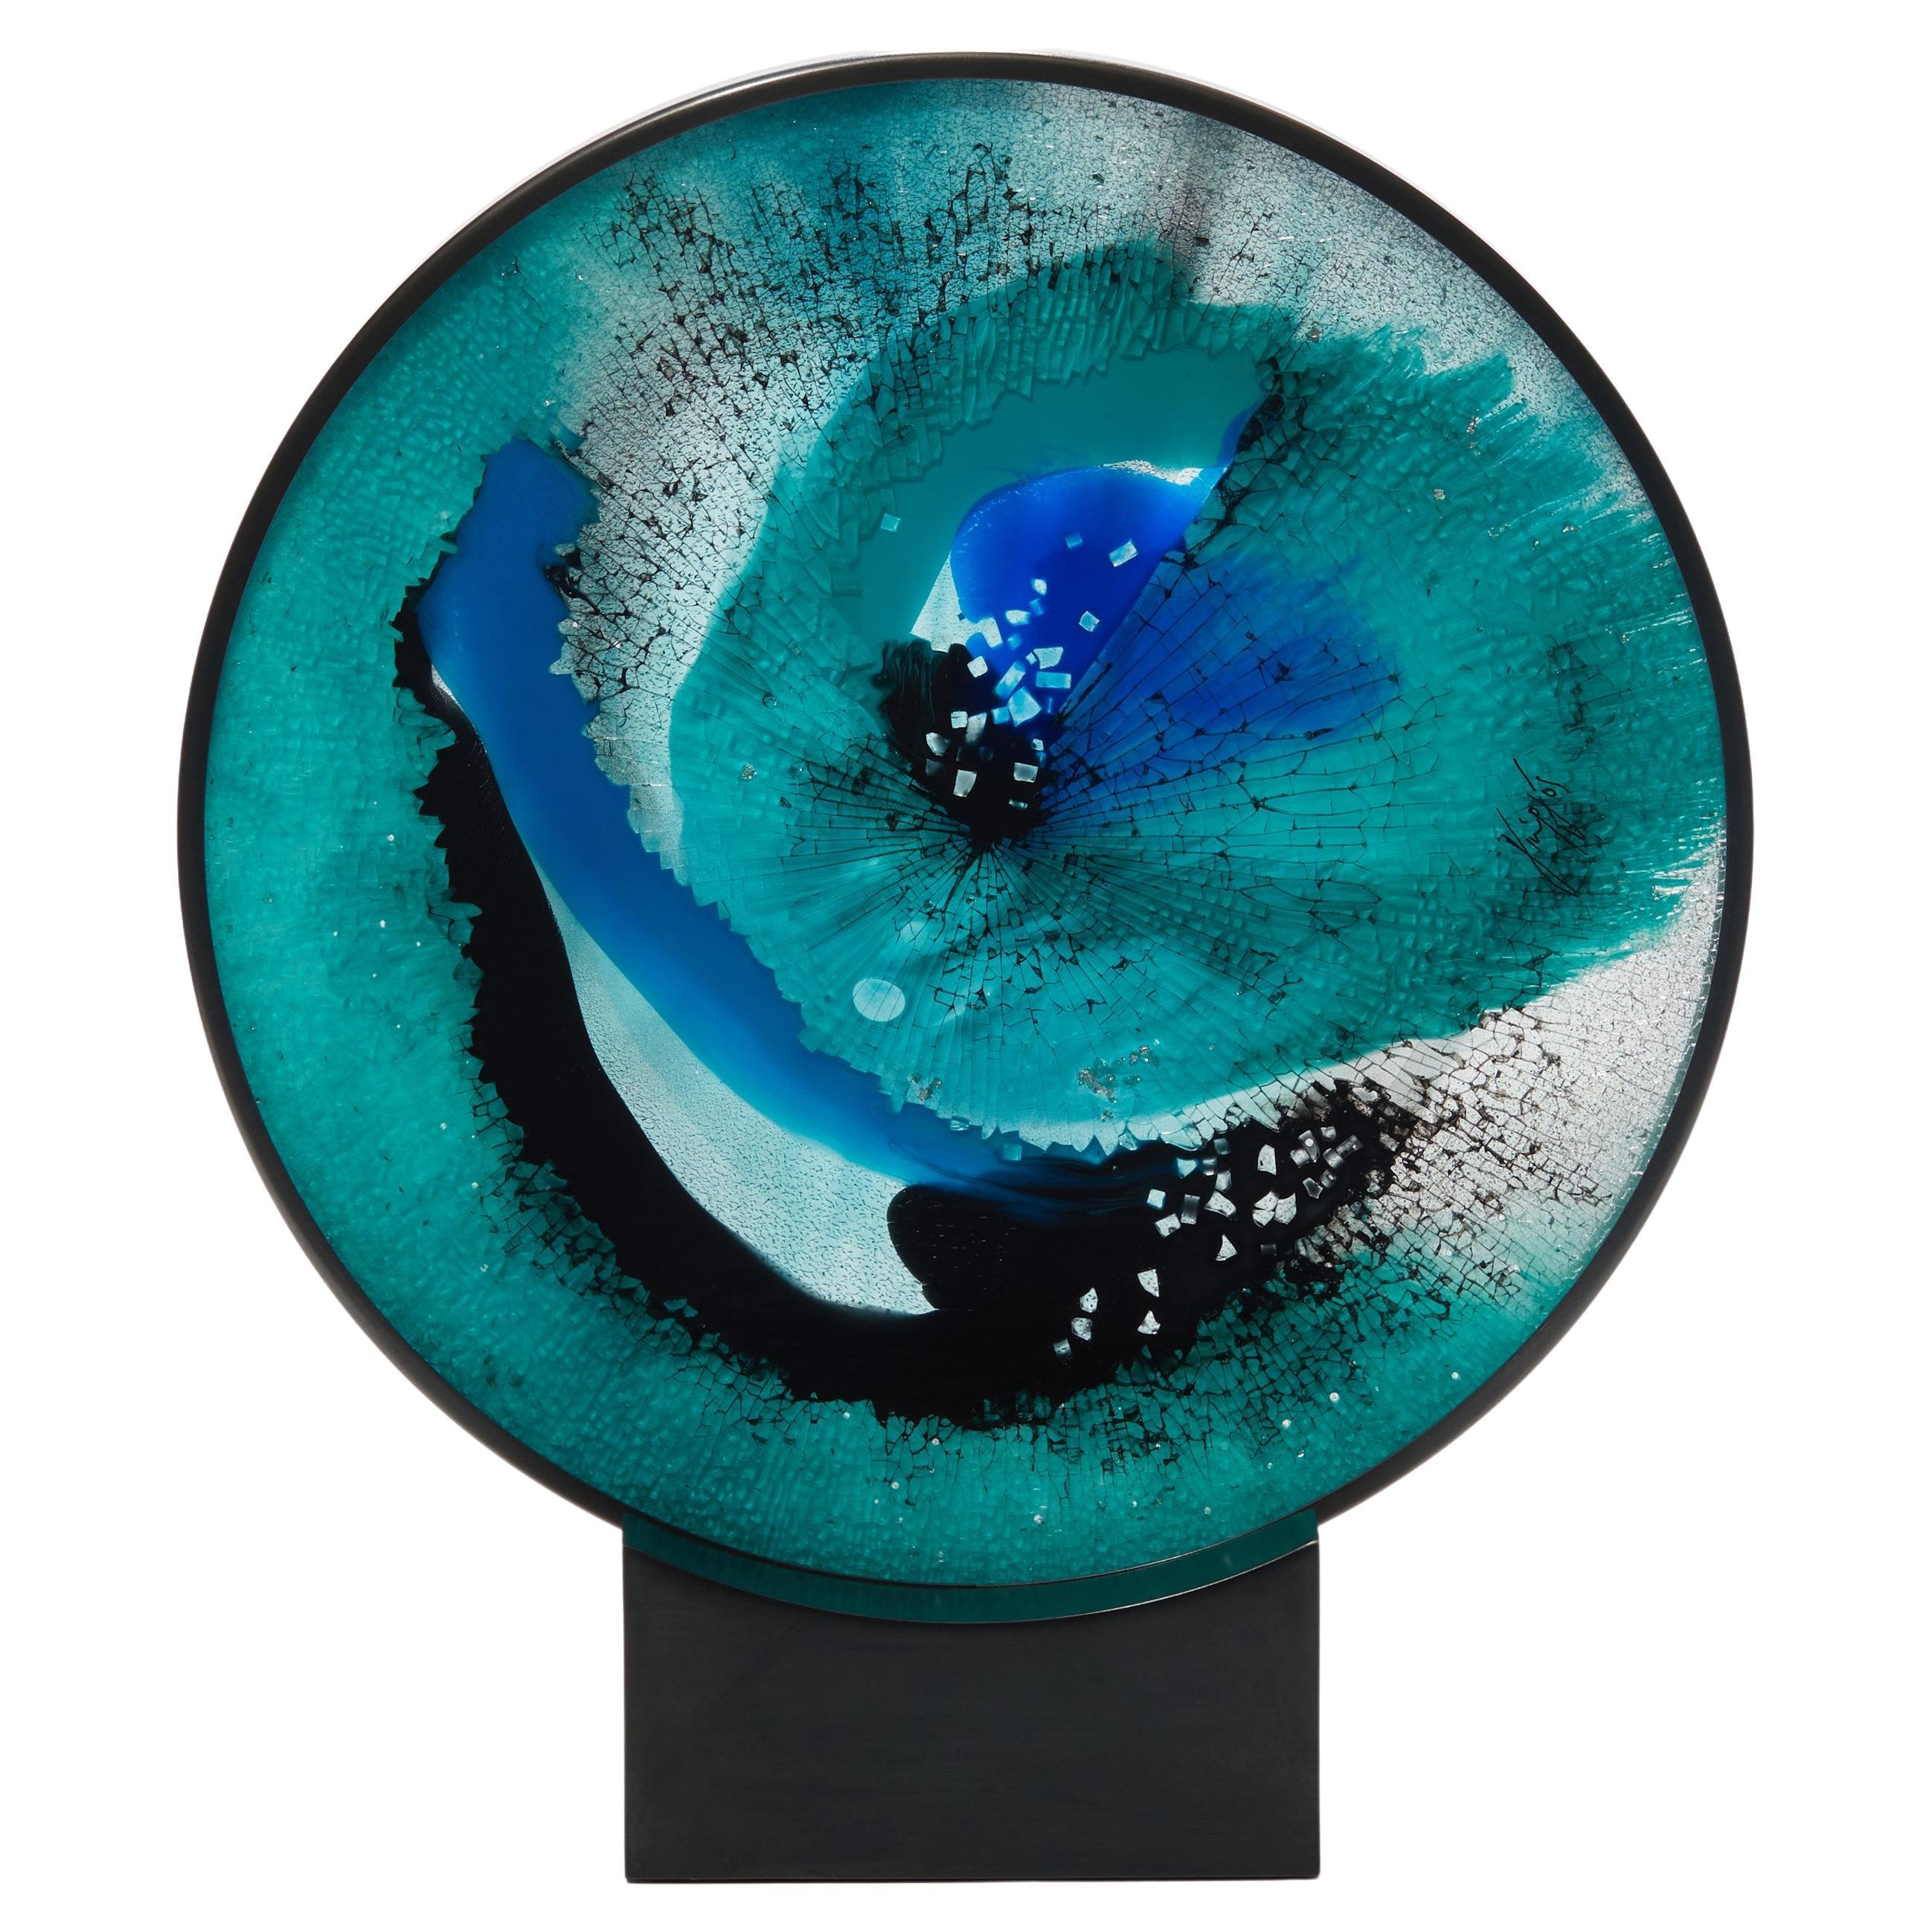 Eye of Discovery, a Blue & Black Abstract Glass Artwork by Yorgos Papadopoulos For Sale